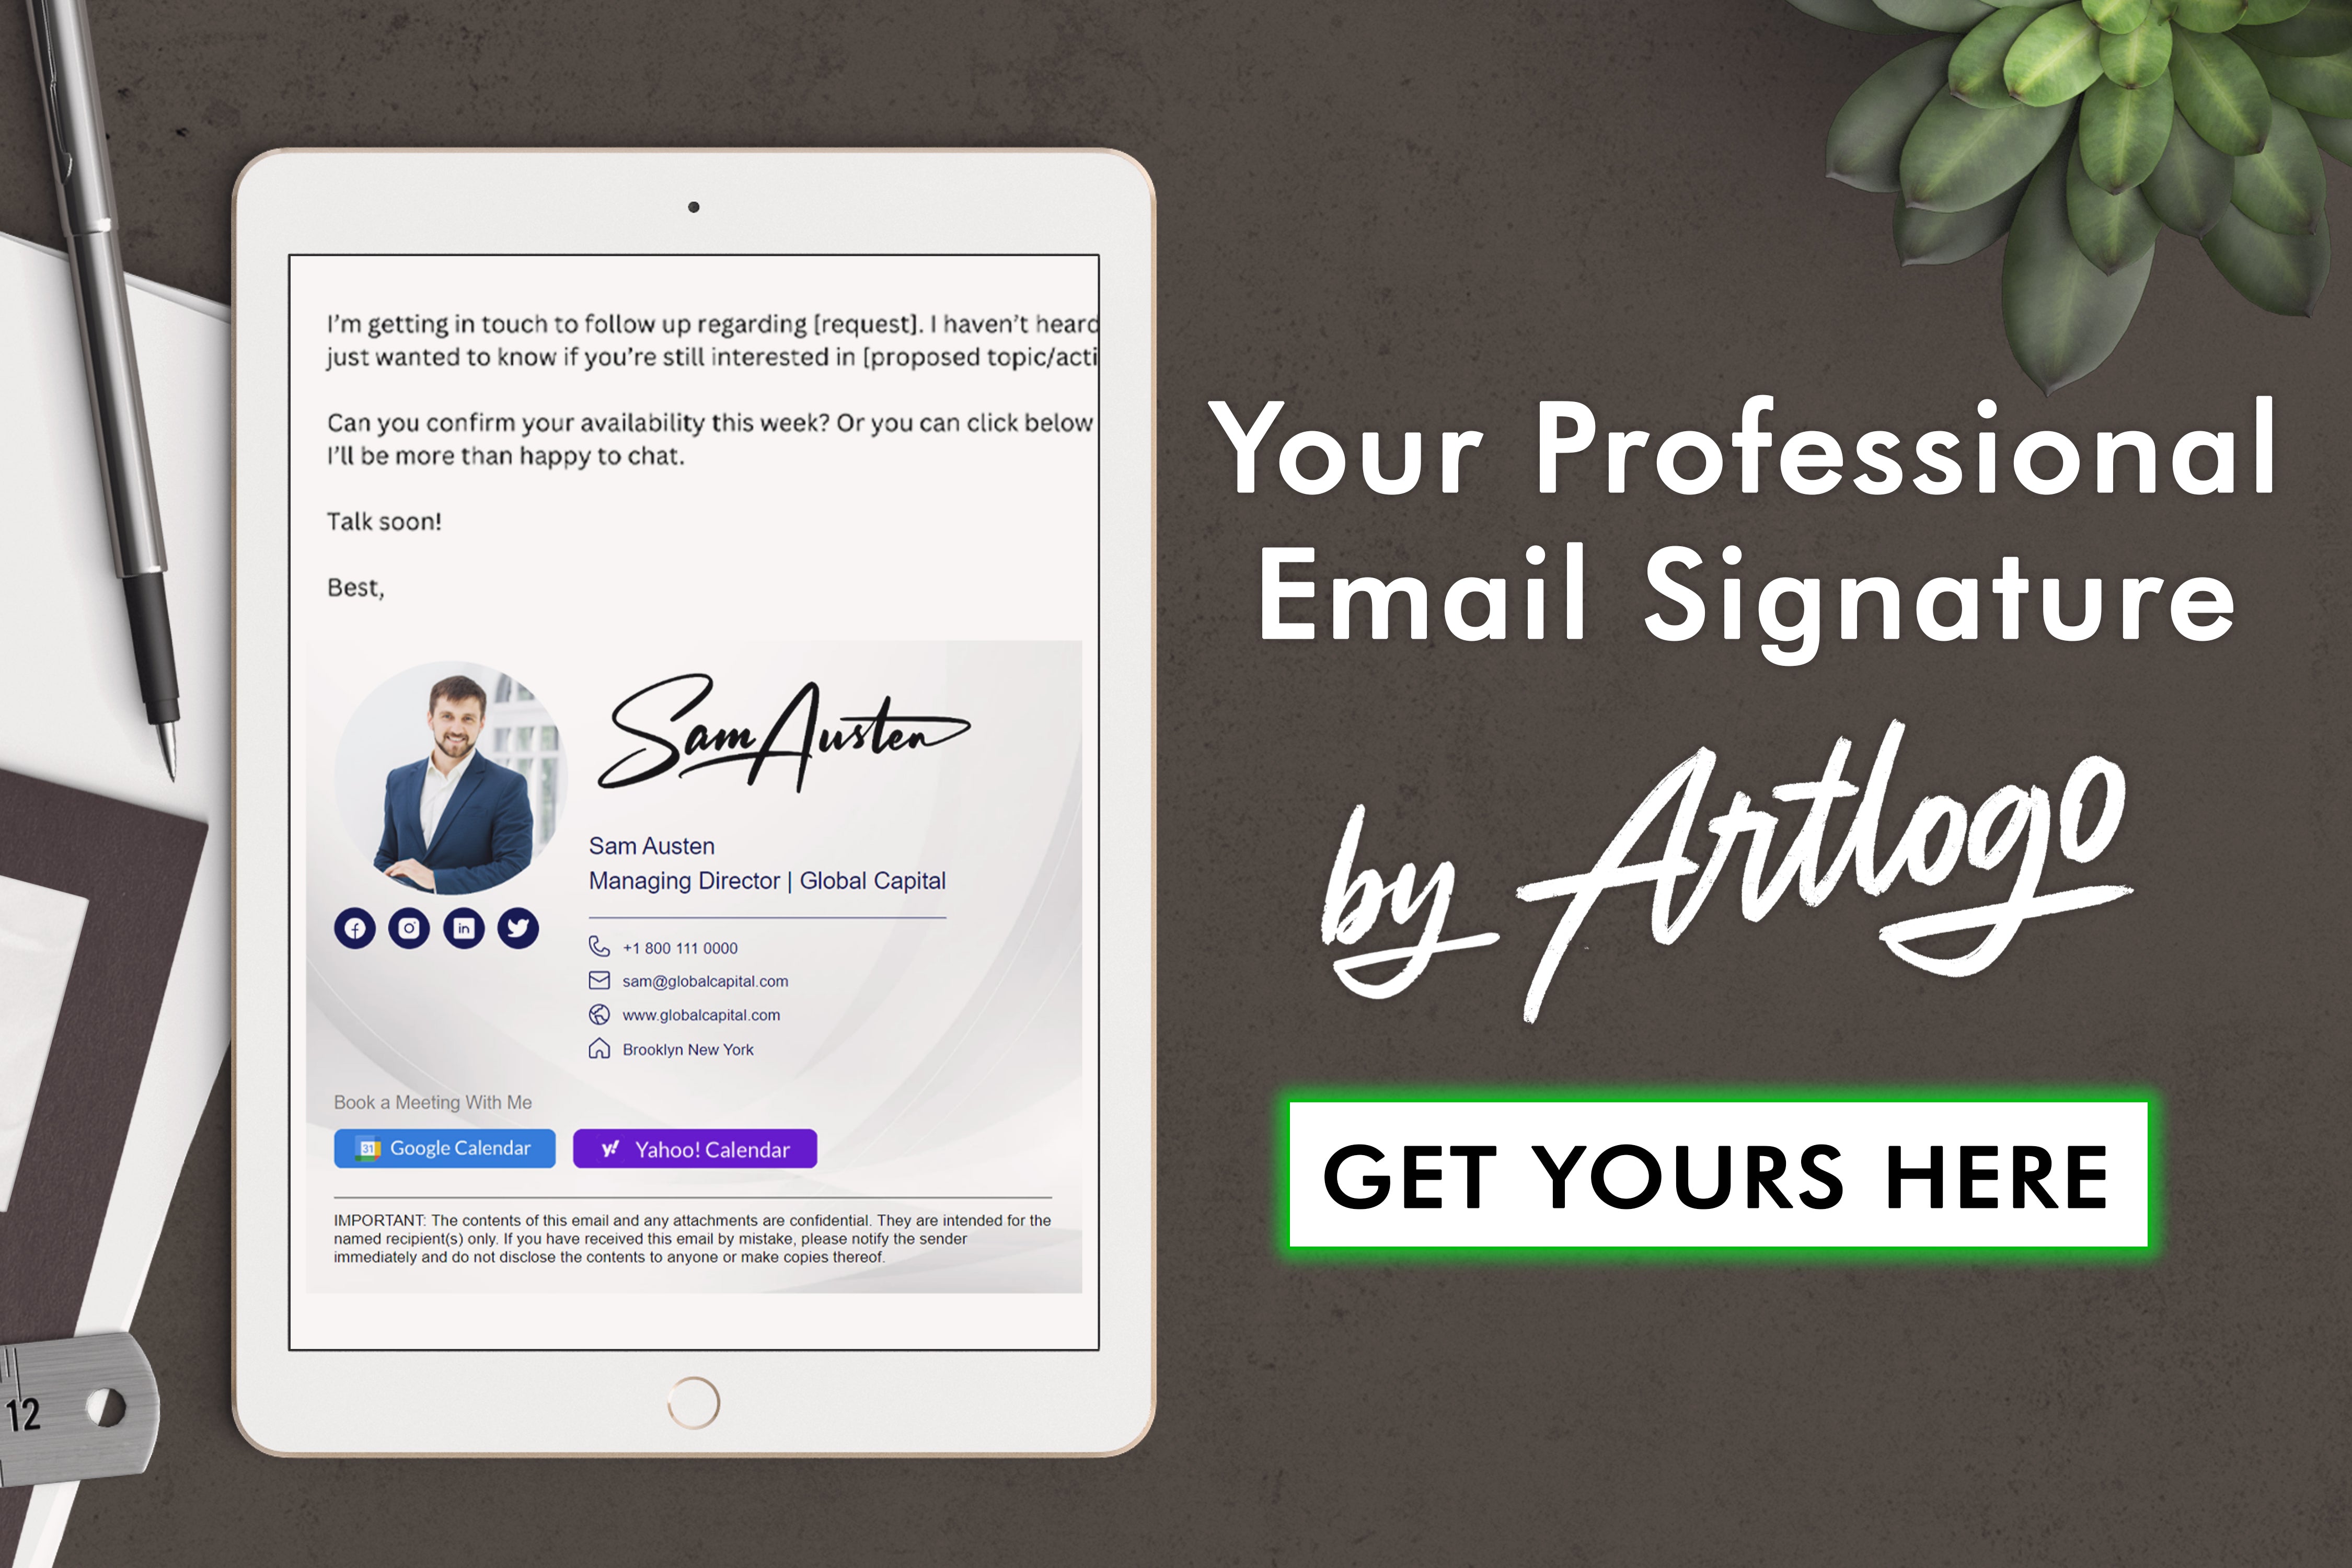 Improve your email communication skills with a focus on email tone to convey professionalism, confidence, and positivity effectively.